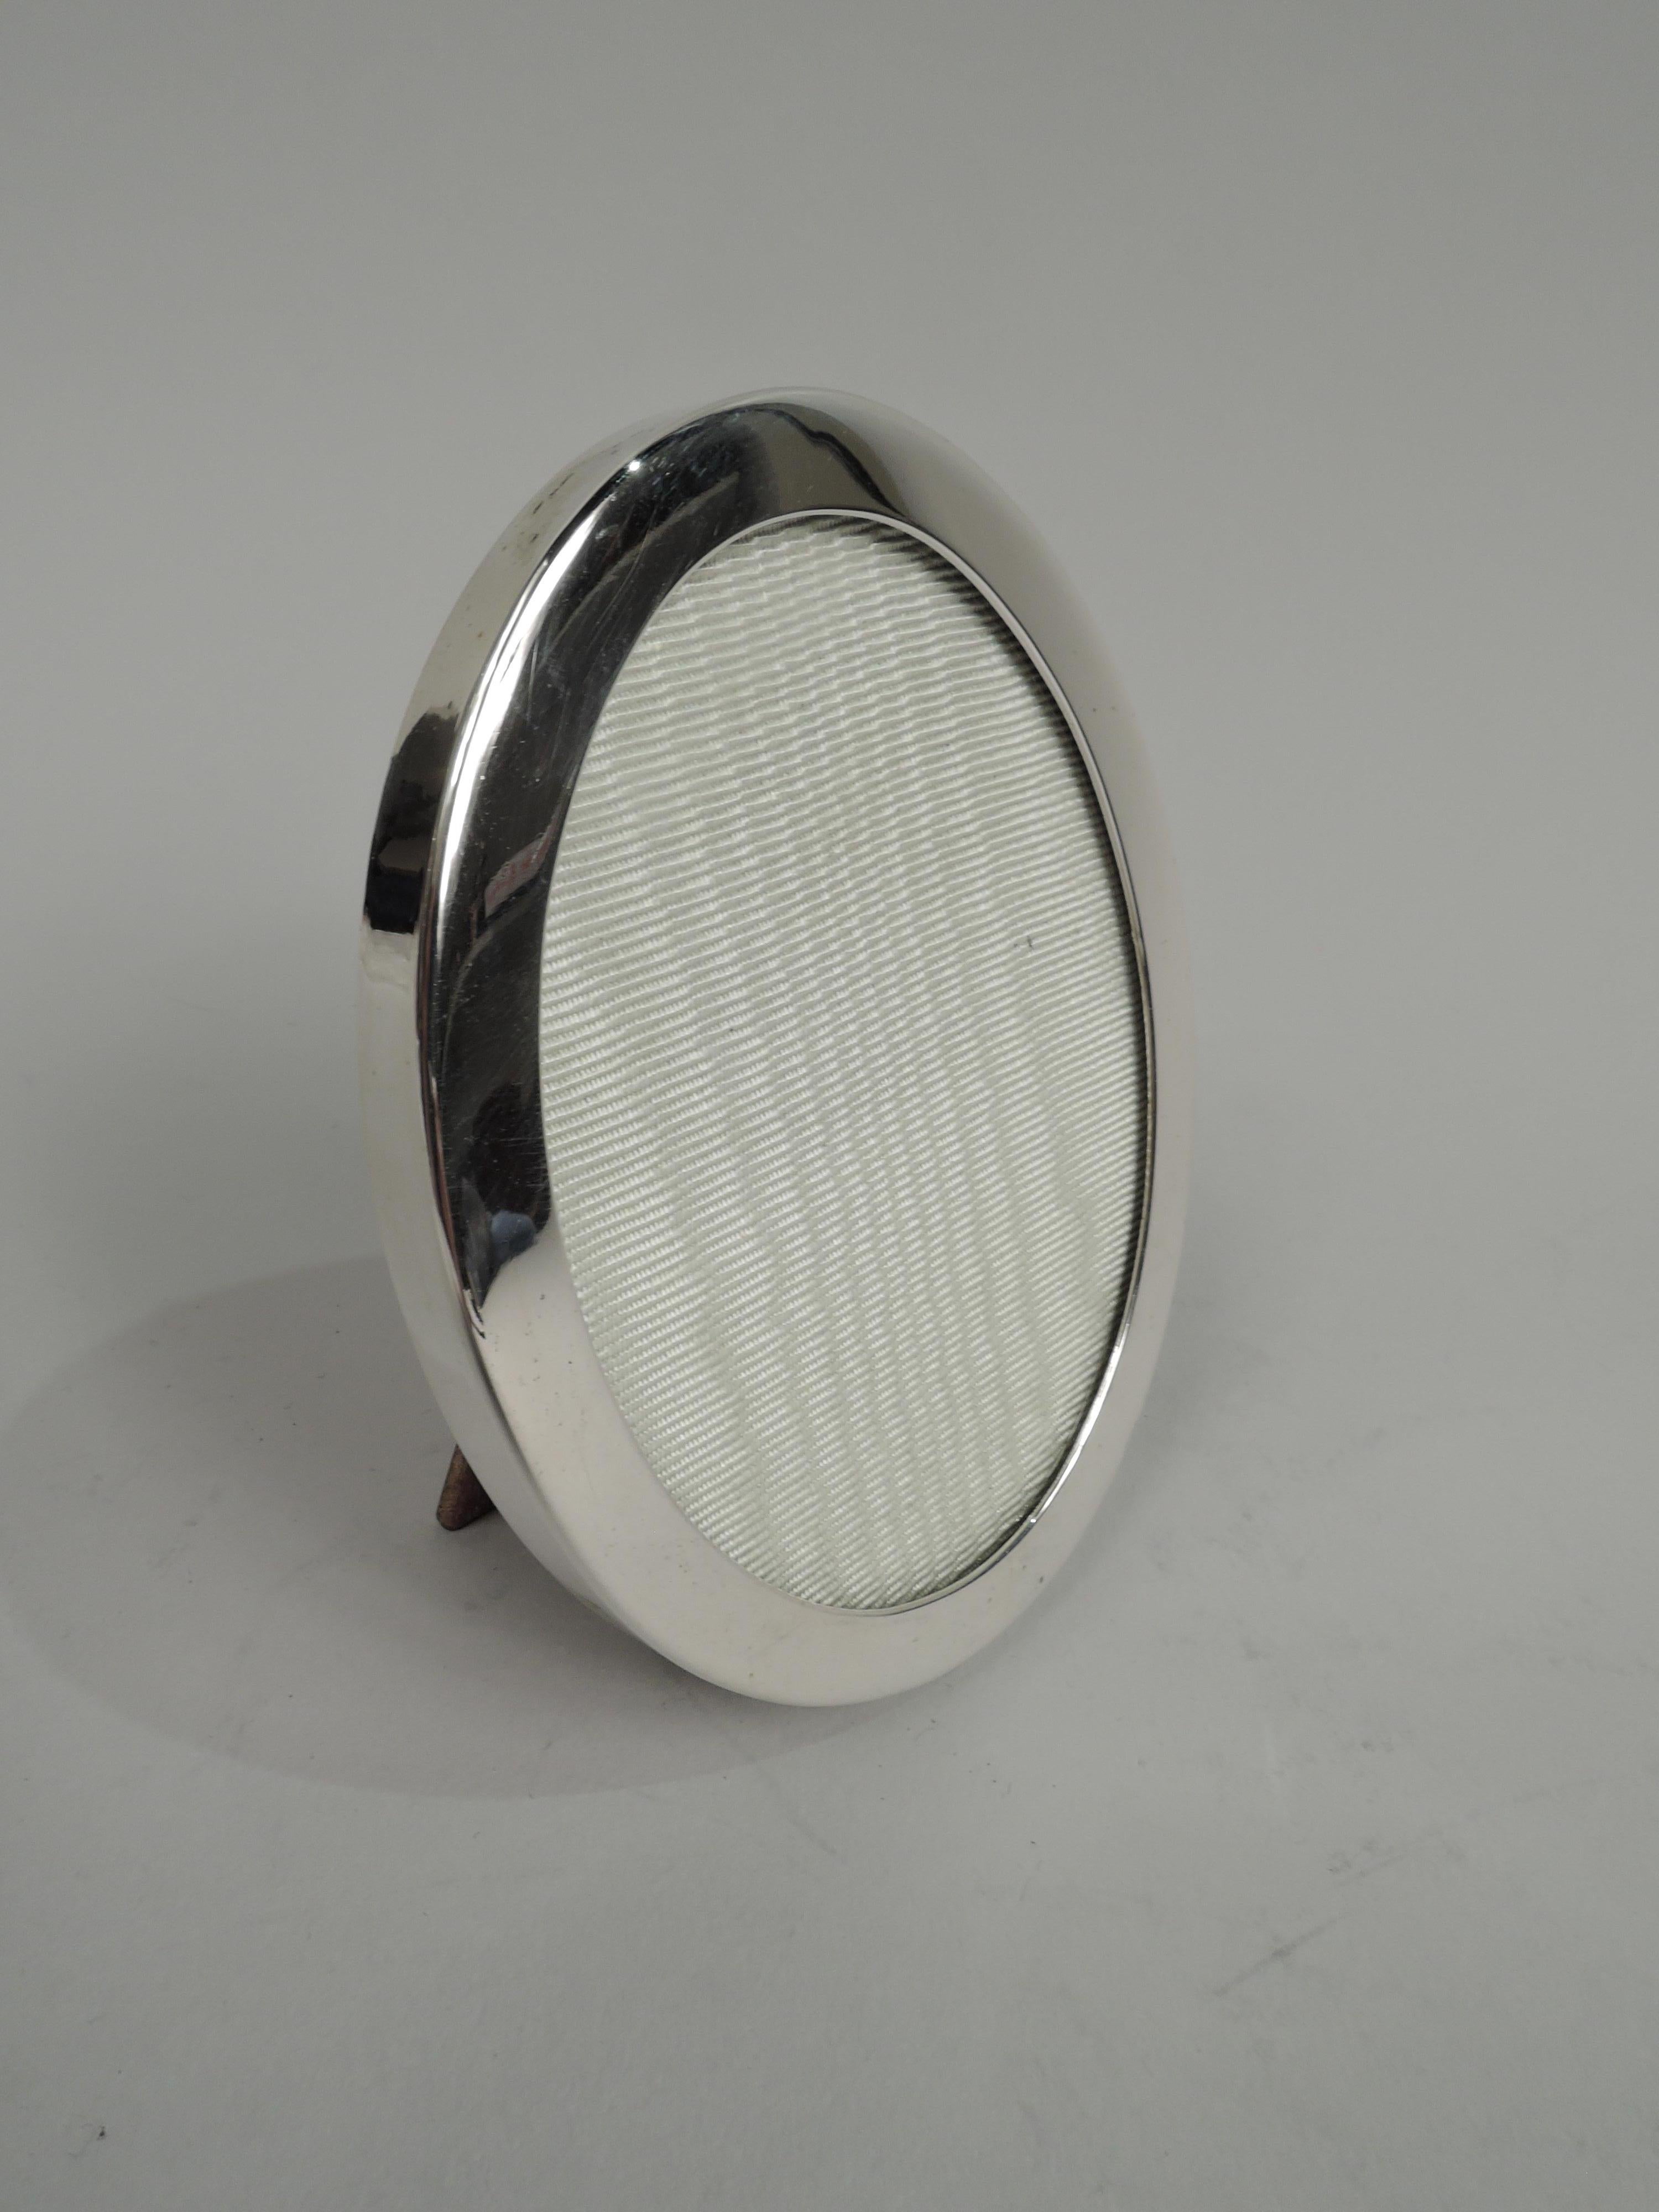 Small sterling silver picture frame. Made by Tiffany & Co. in New York. Oval window and flat surround. With glass, liner, and wood back and hinged easel support. Marked “Tiffany & Co. Makers Sterling”. 

Dimensions: Frame: H 3 3/4 x W 3 in.